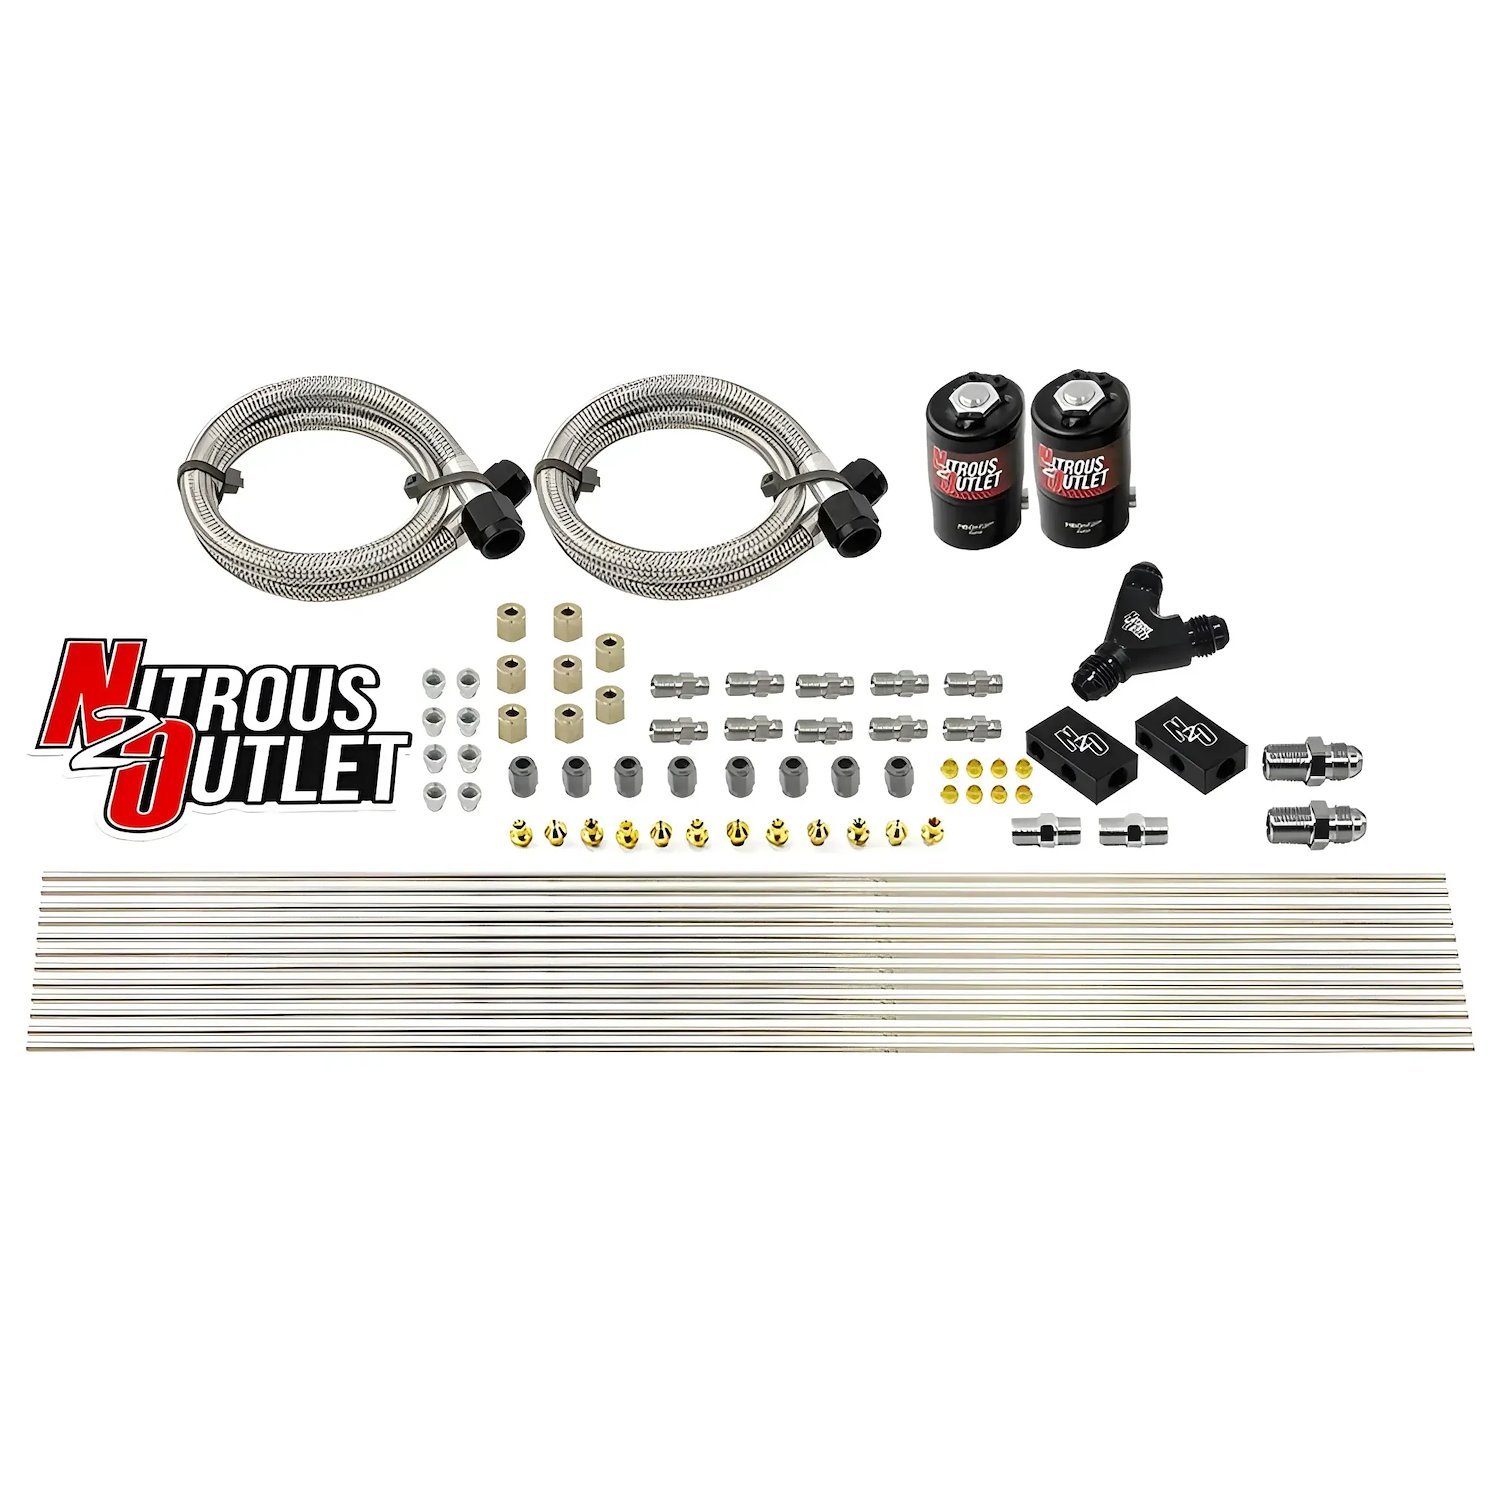 00-10418-H Dry 8-Cyl Solenoid Forward Direct Port Conversion Kit, Two .122 Nitrous Solenoids/Compact Distribution Blocks